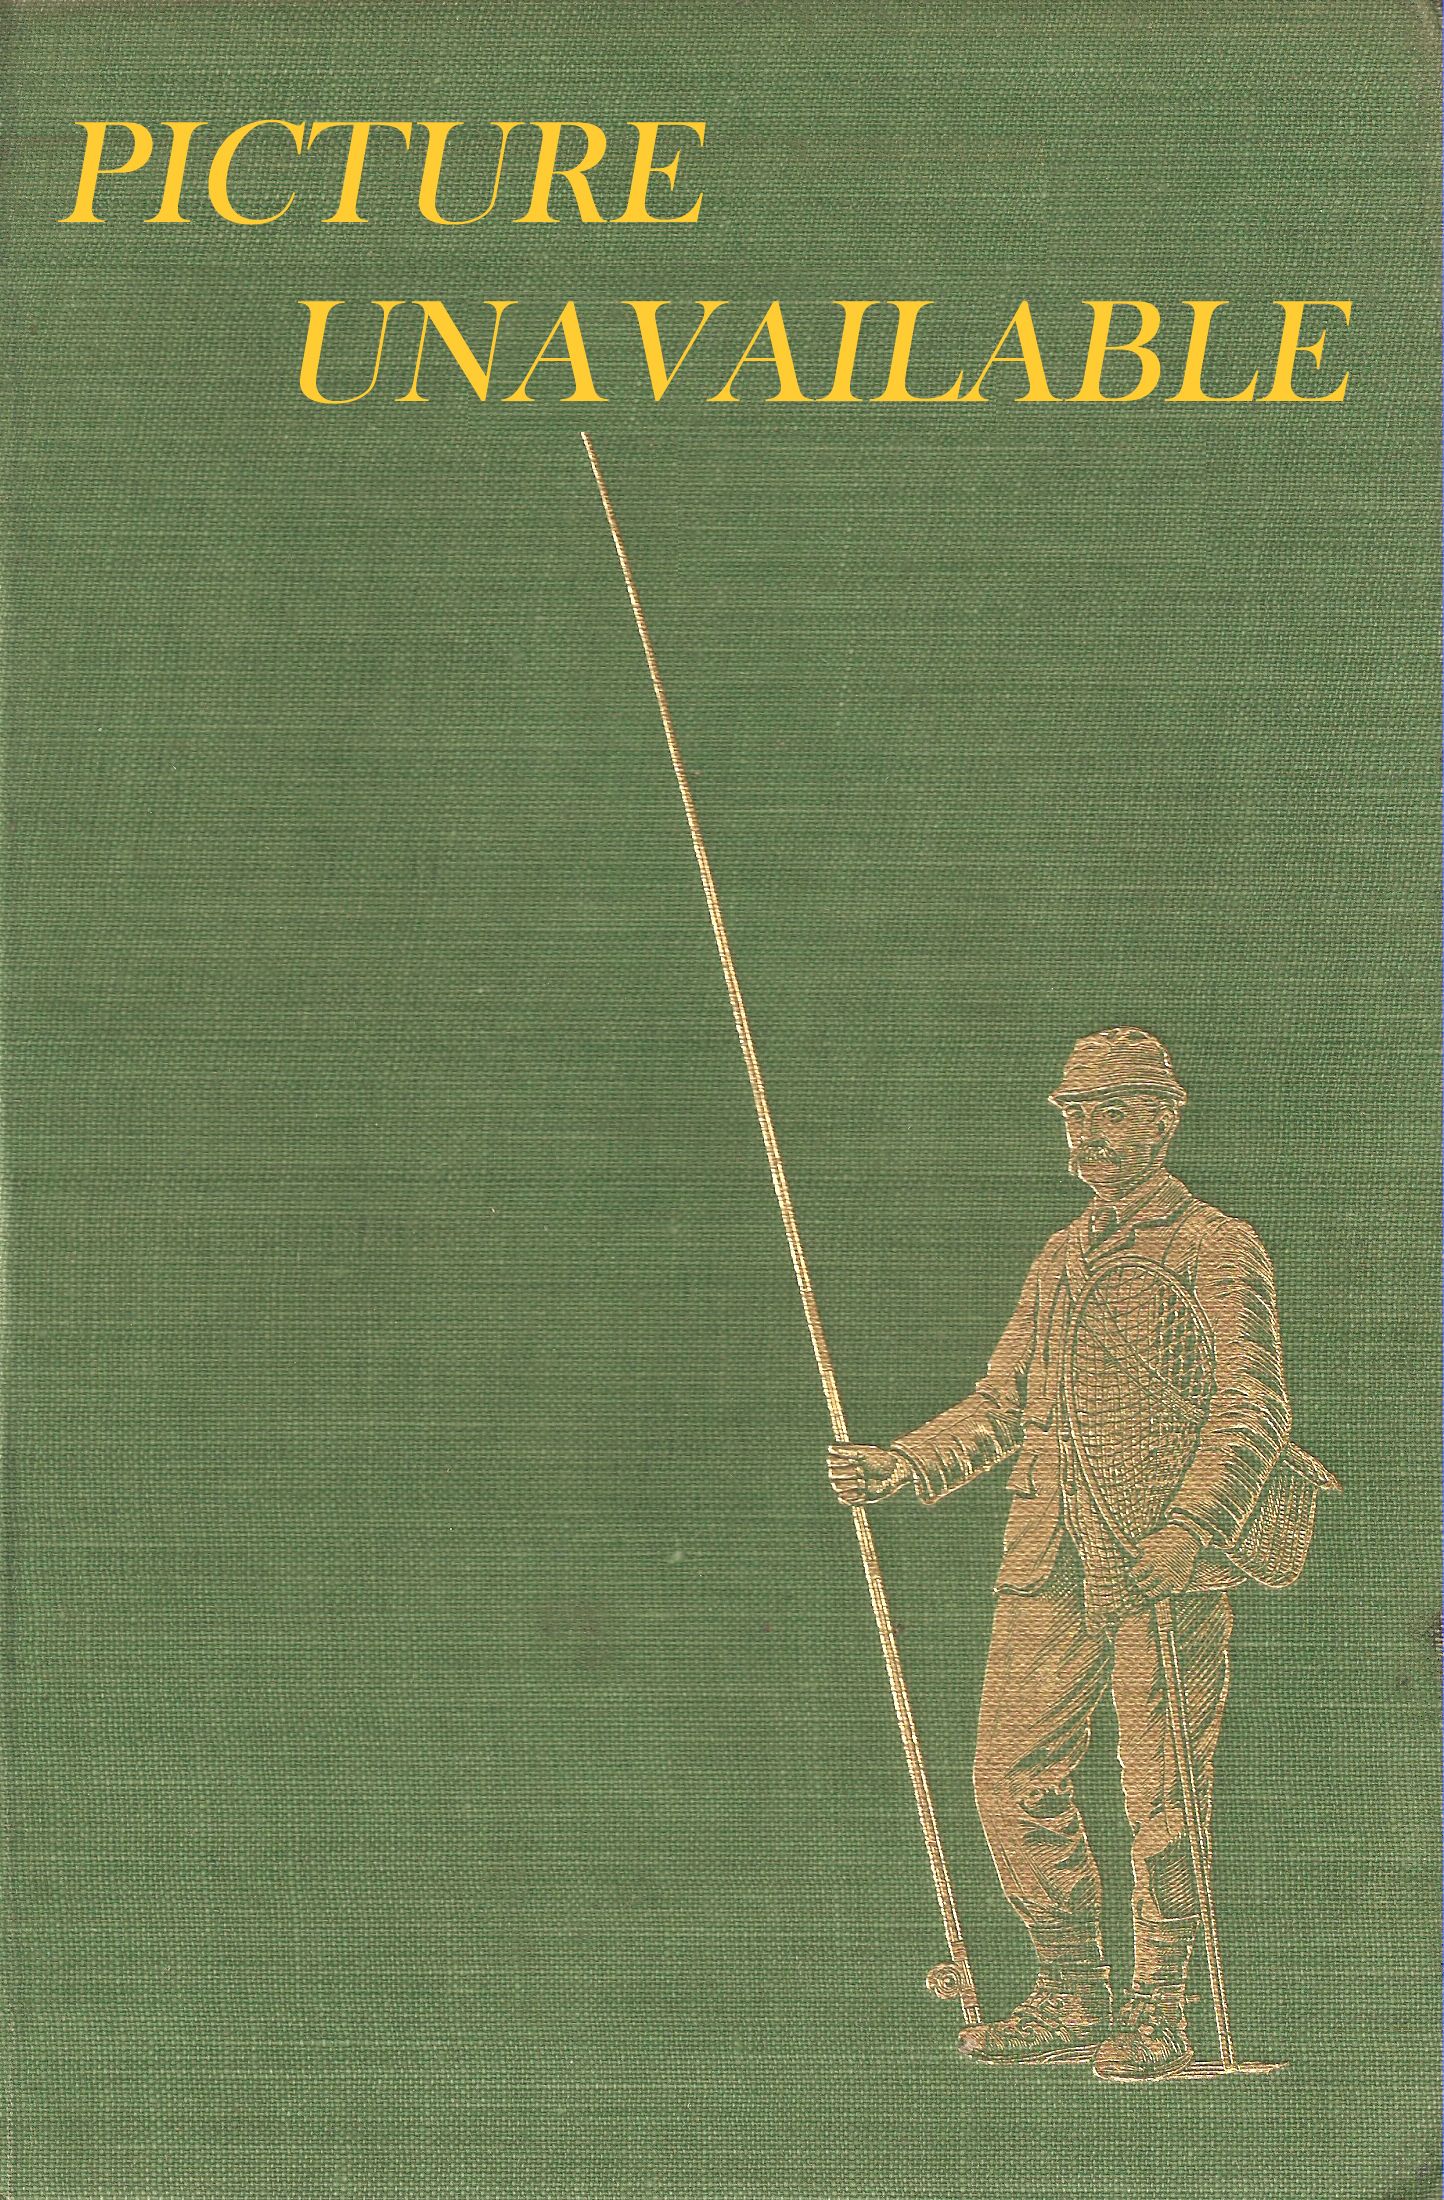 CREEL: A FISHING MAGAZINE. Volume 2, number 4. October 1964.